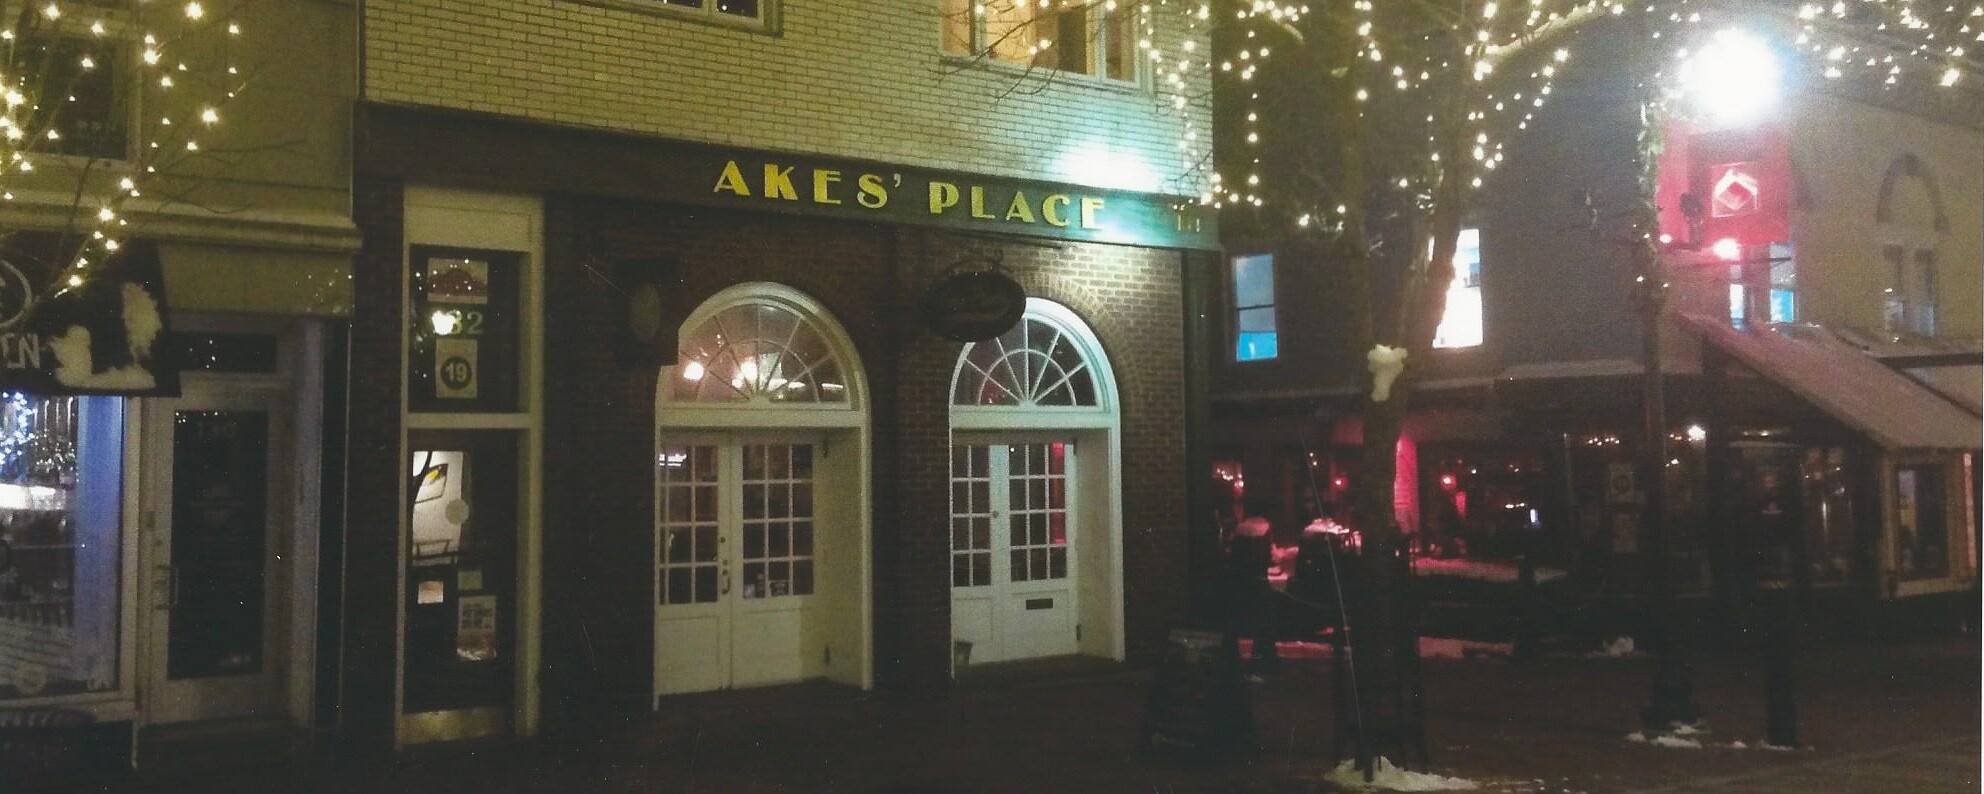 Akes' Place